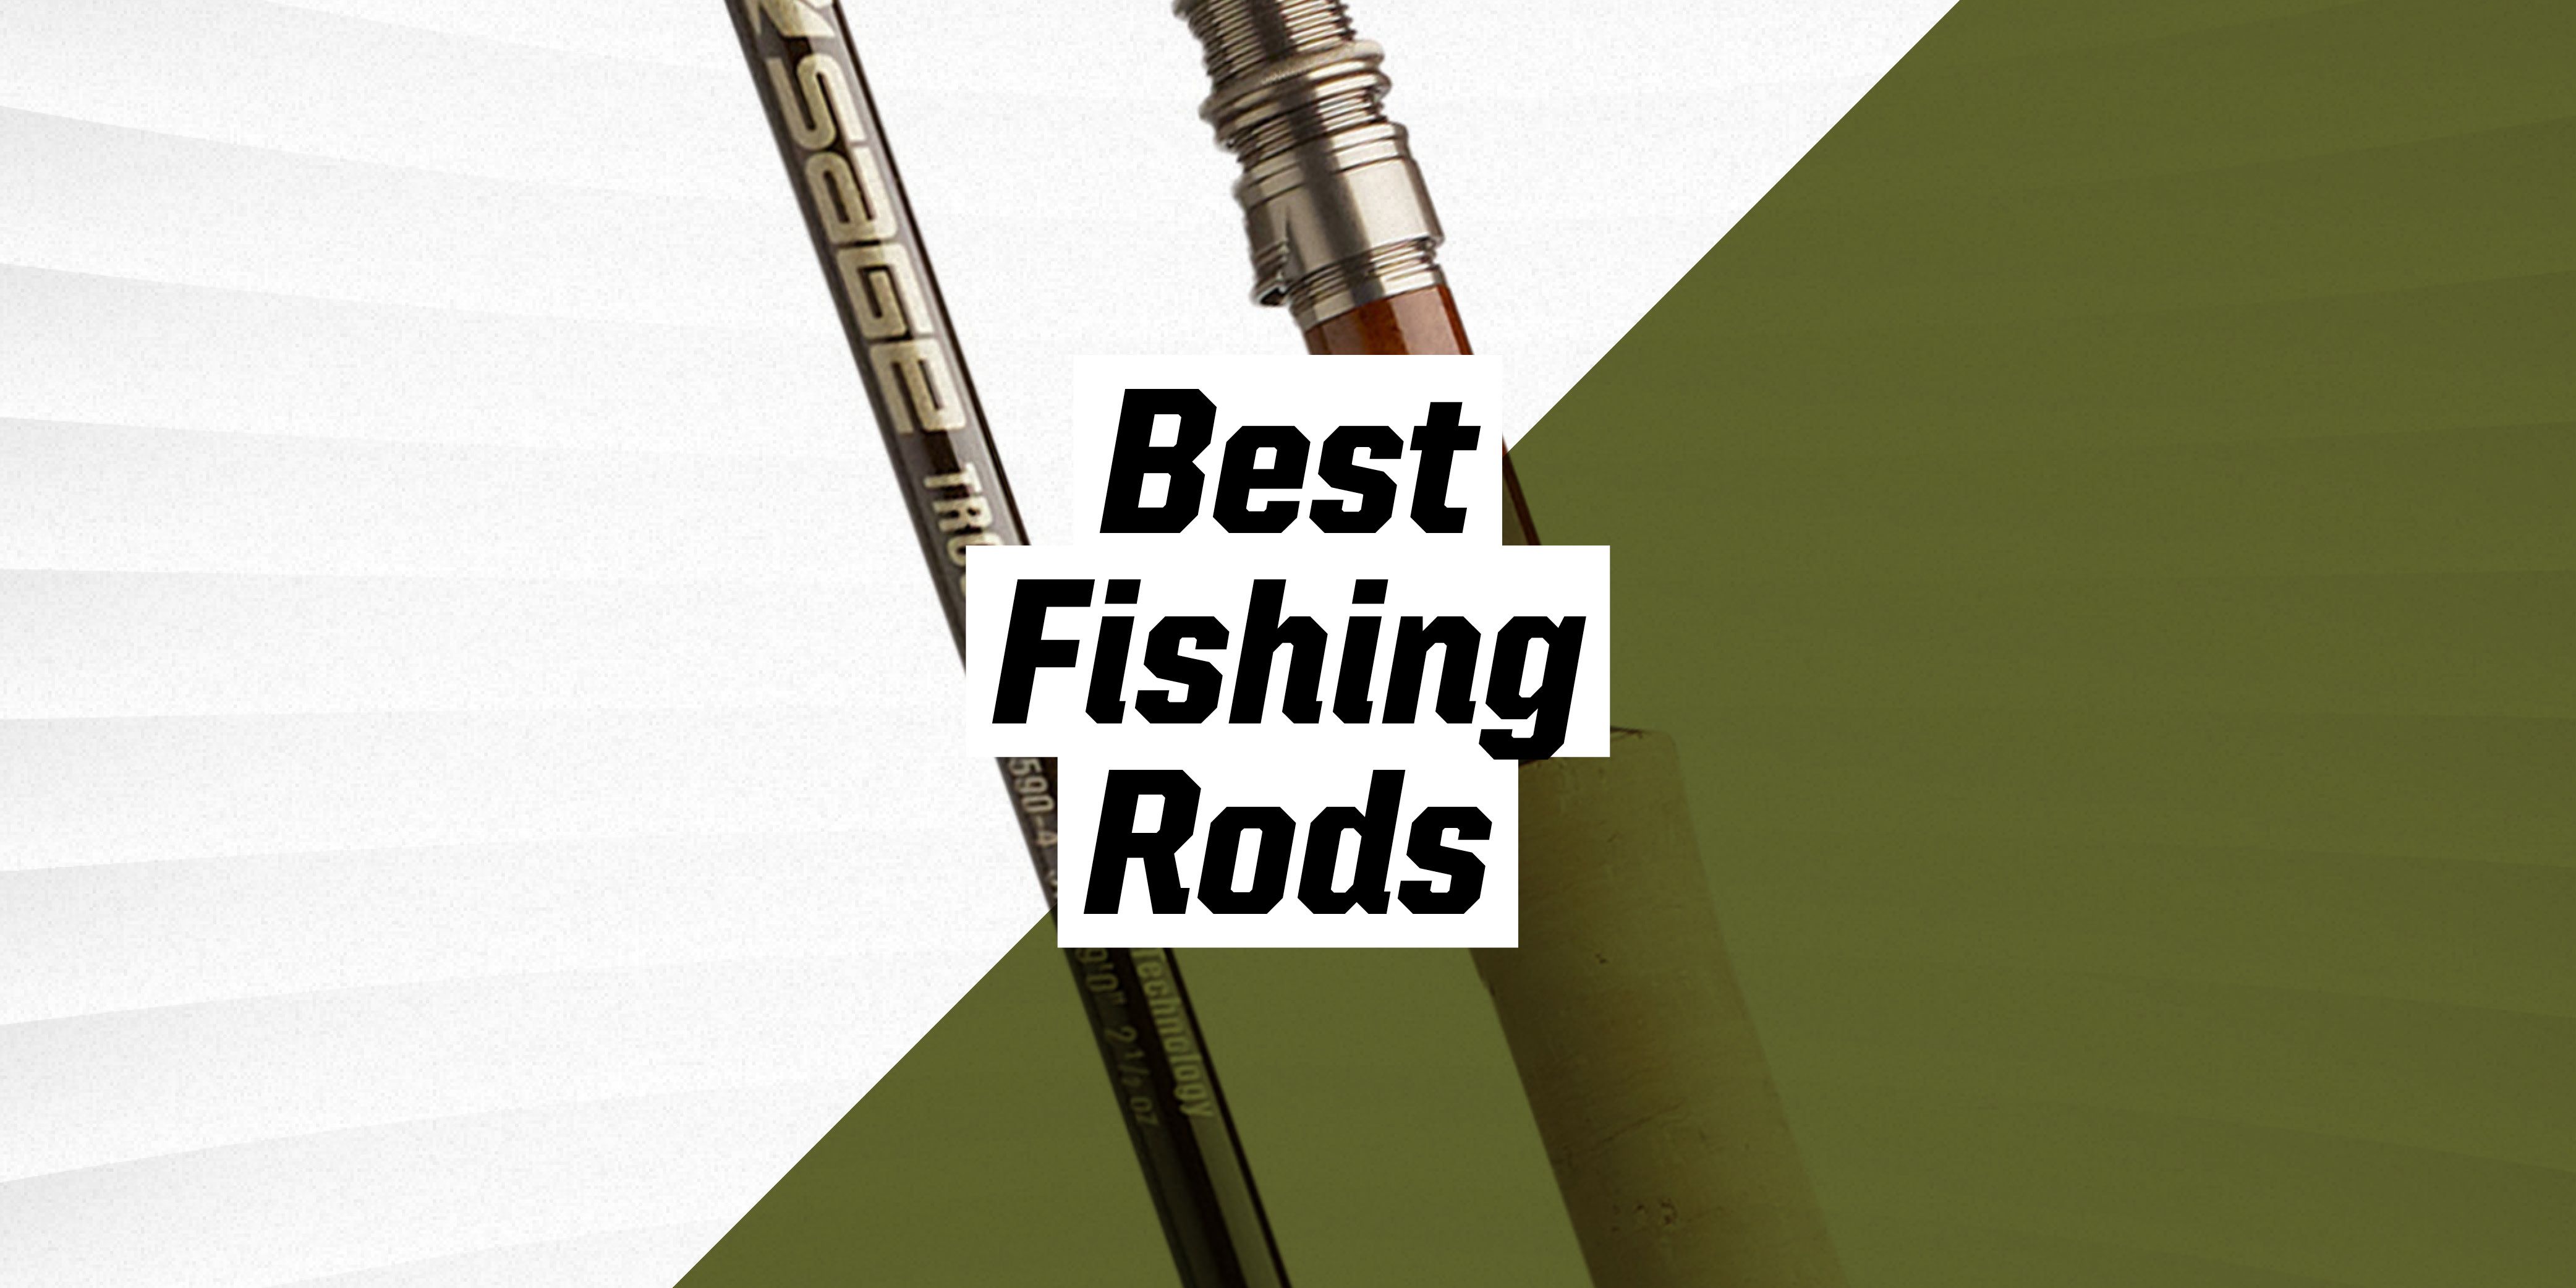 Articles :: 21 - 10 Great Fly Fishing Gifts for Every Budget!